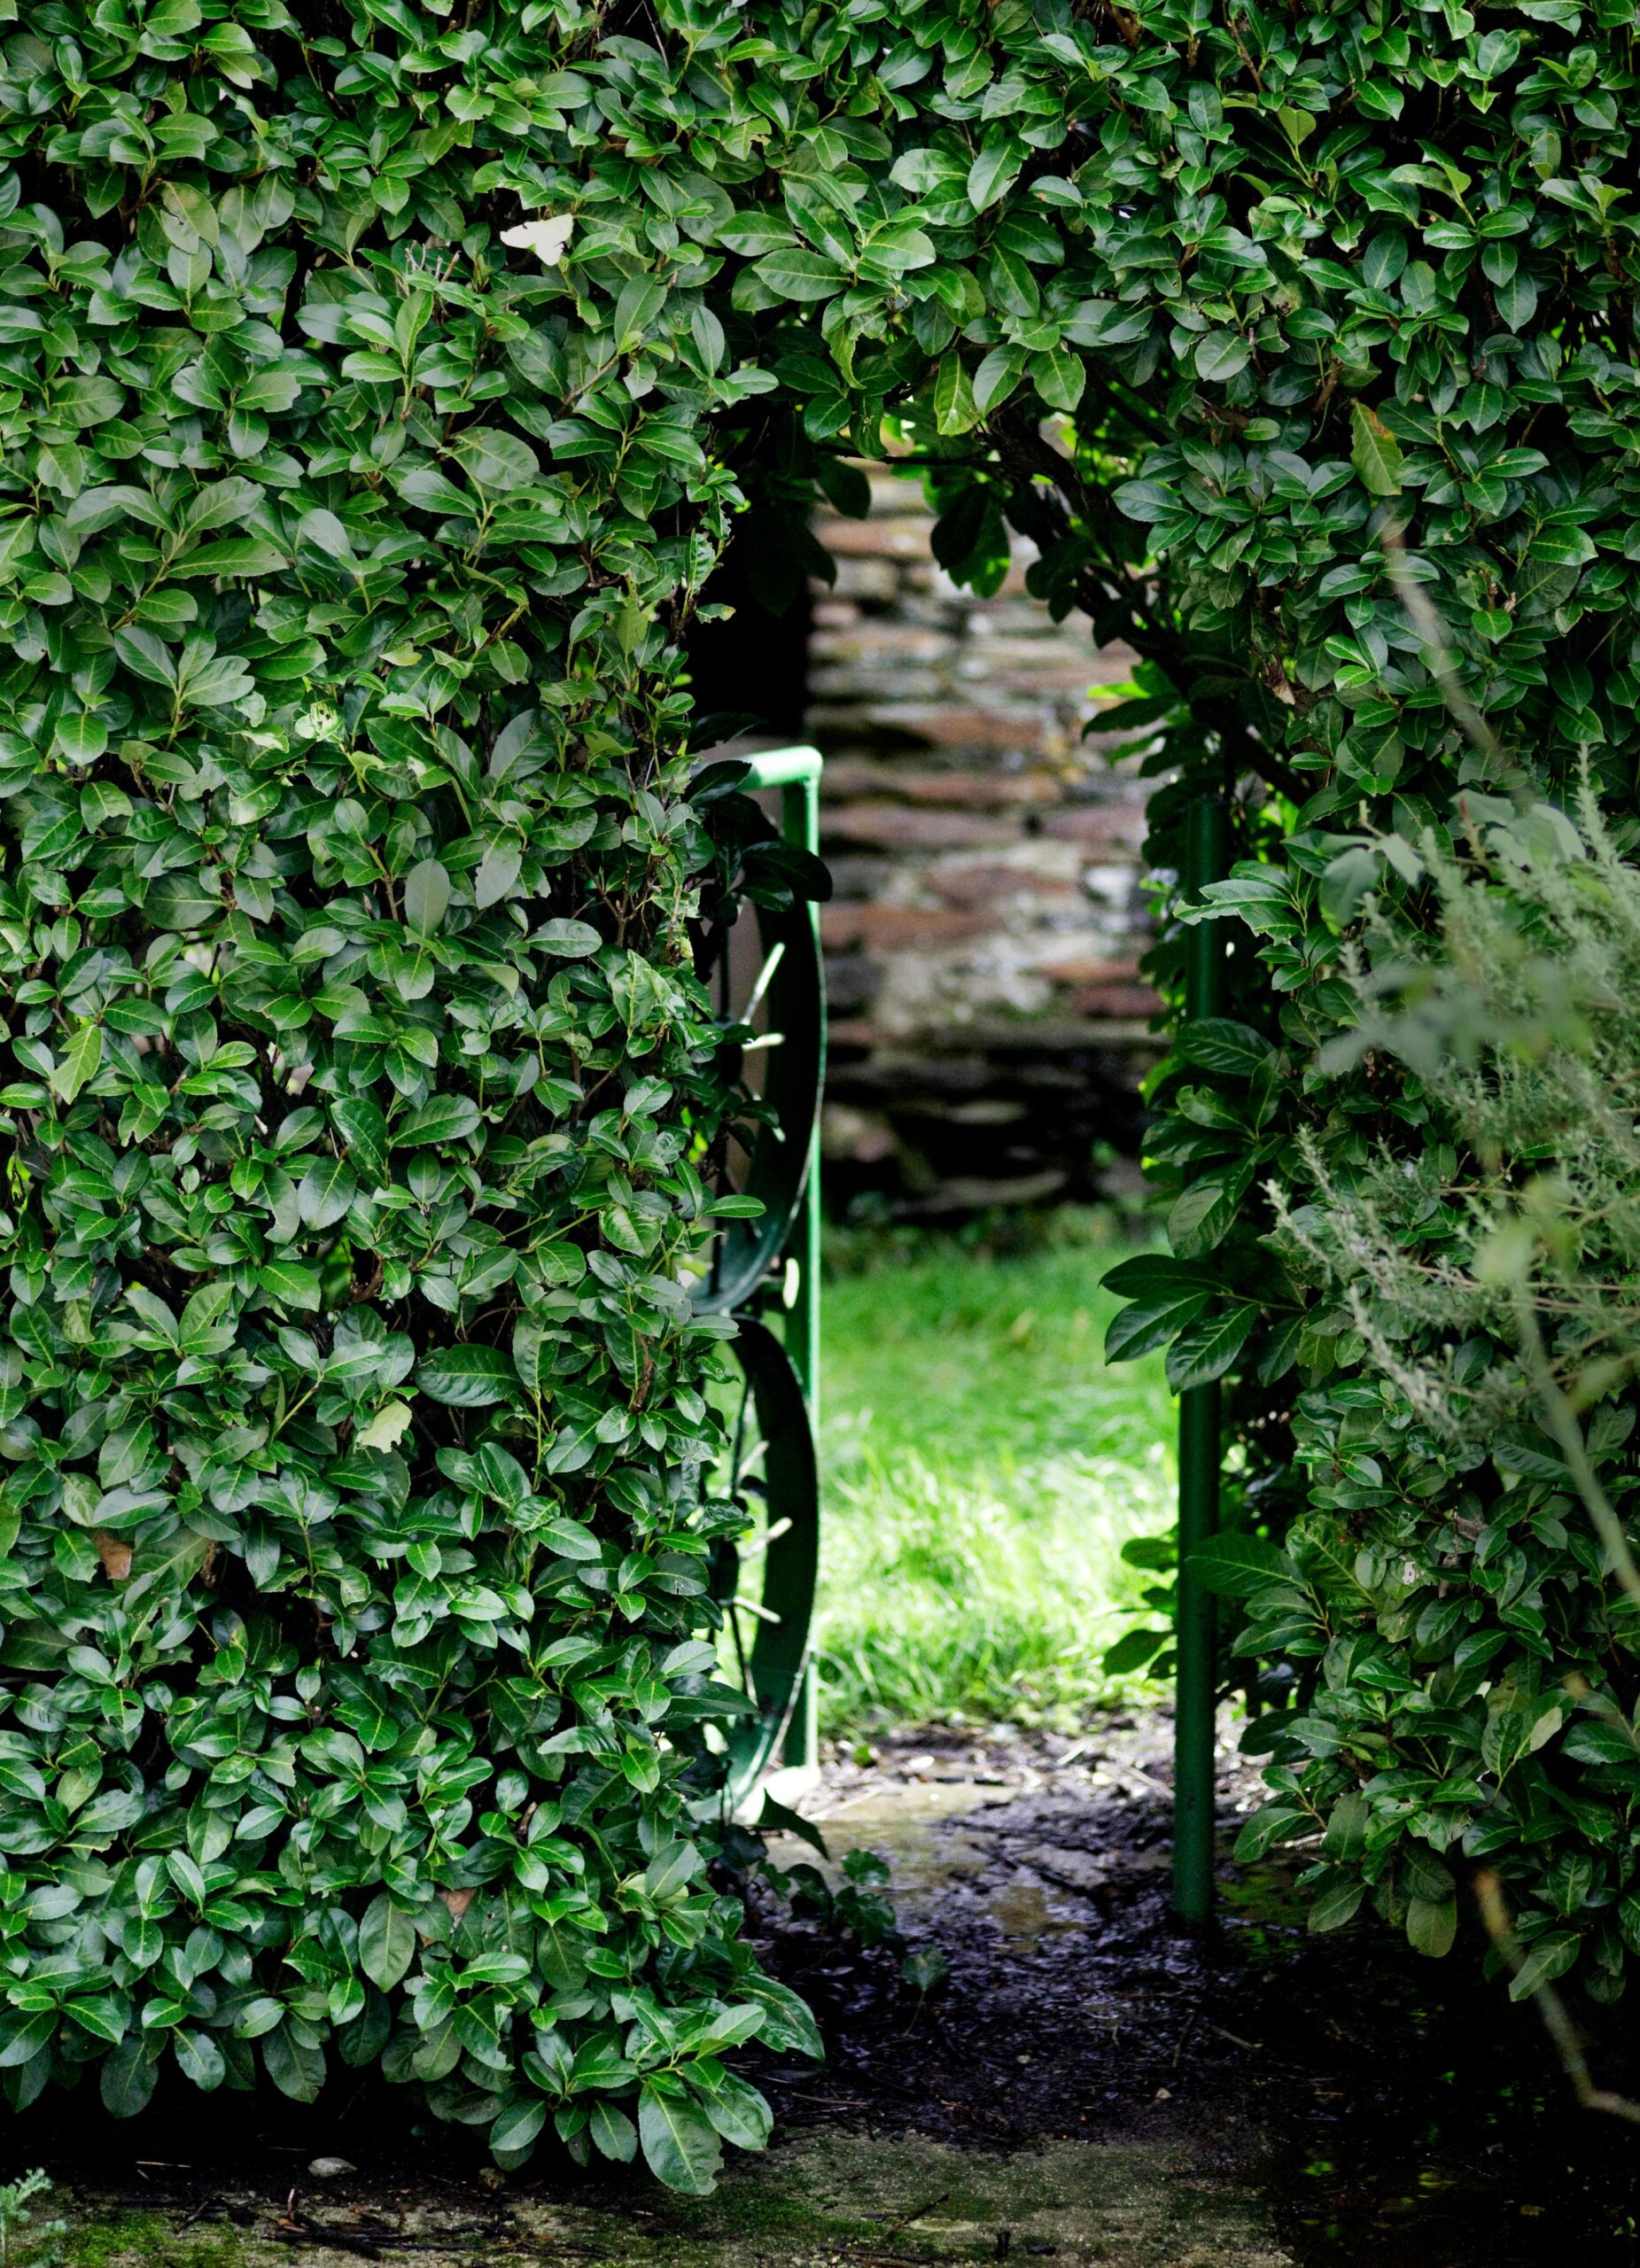 A wall of hedges with a gate in between